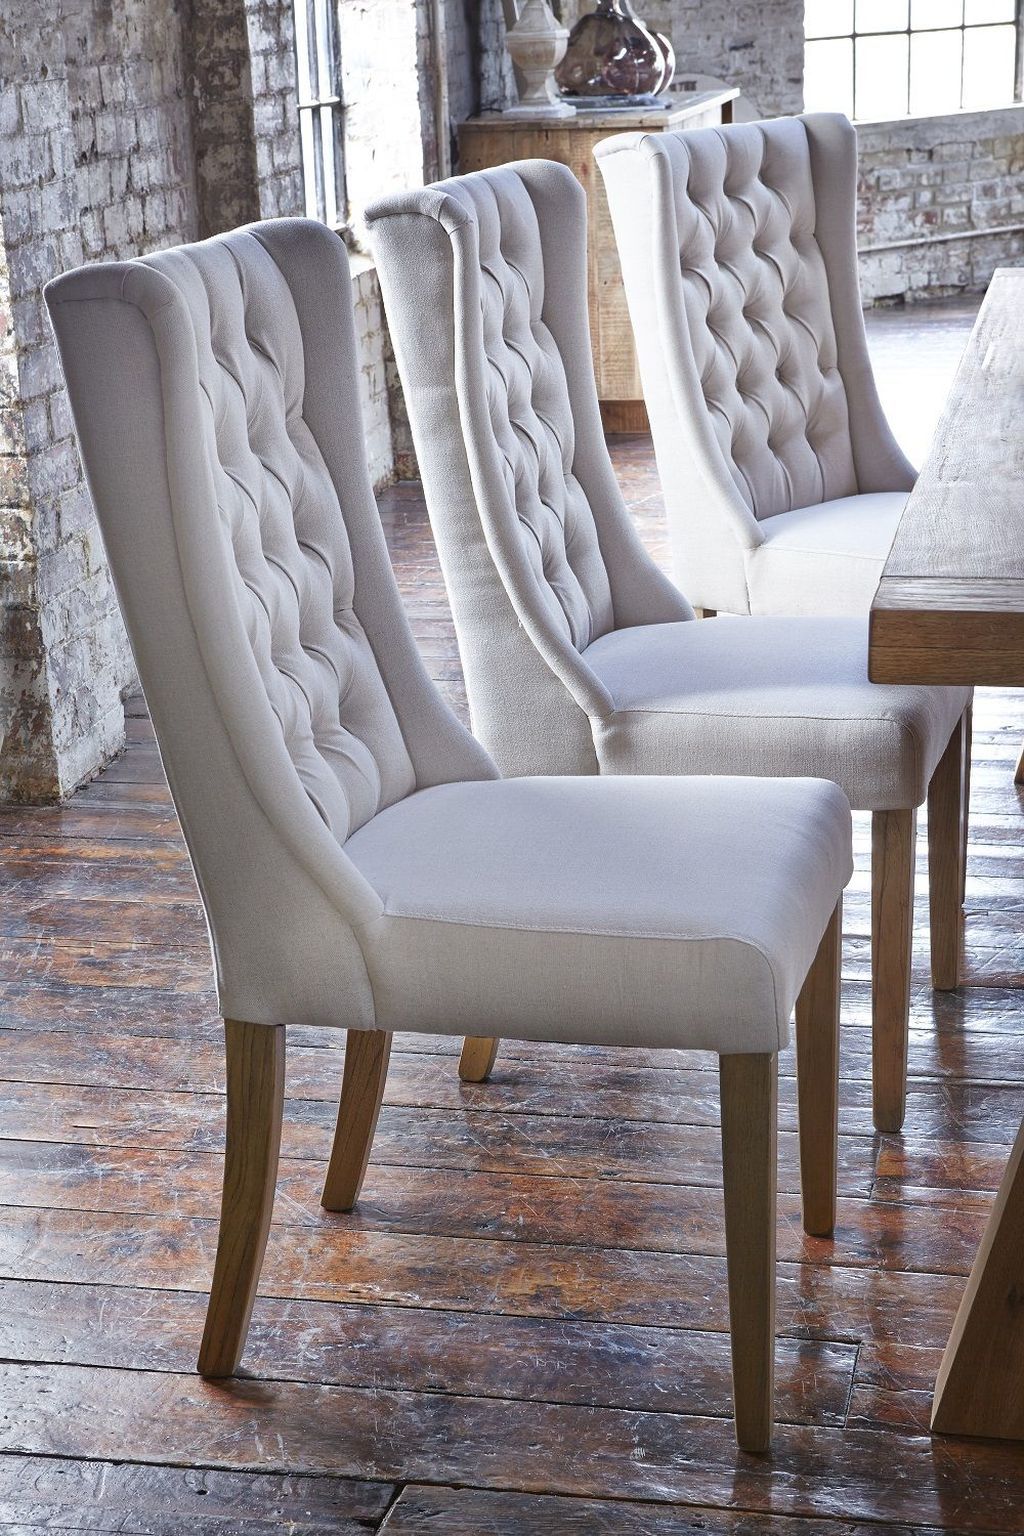 The Perfect Upholstery Fabric for your Dining Room Furniture